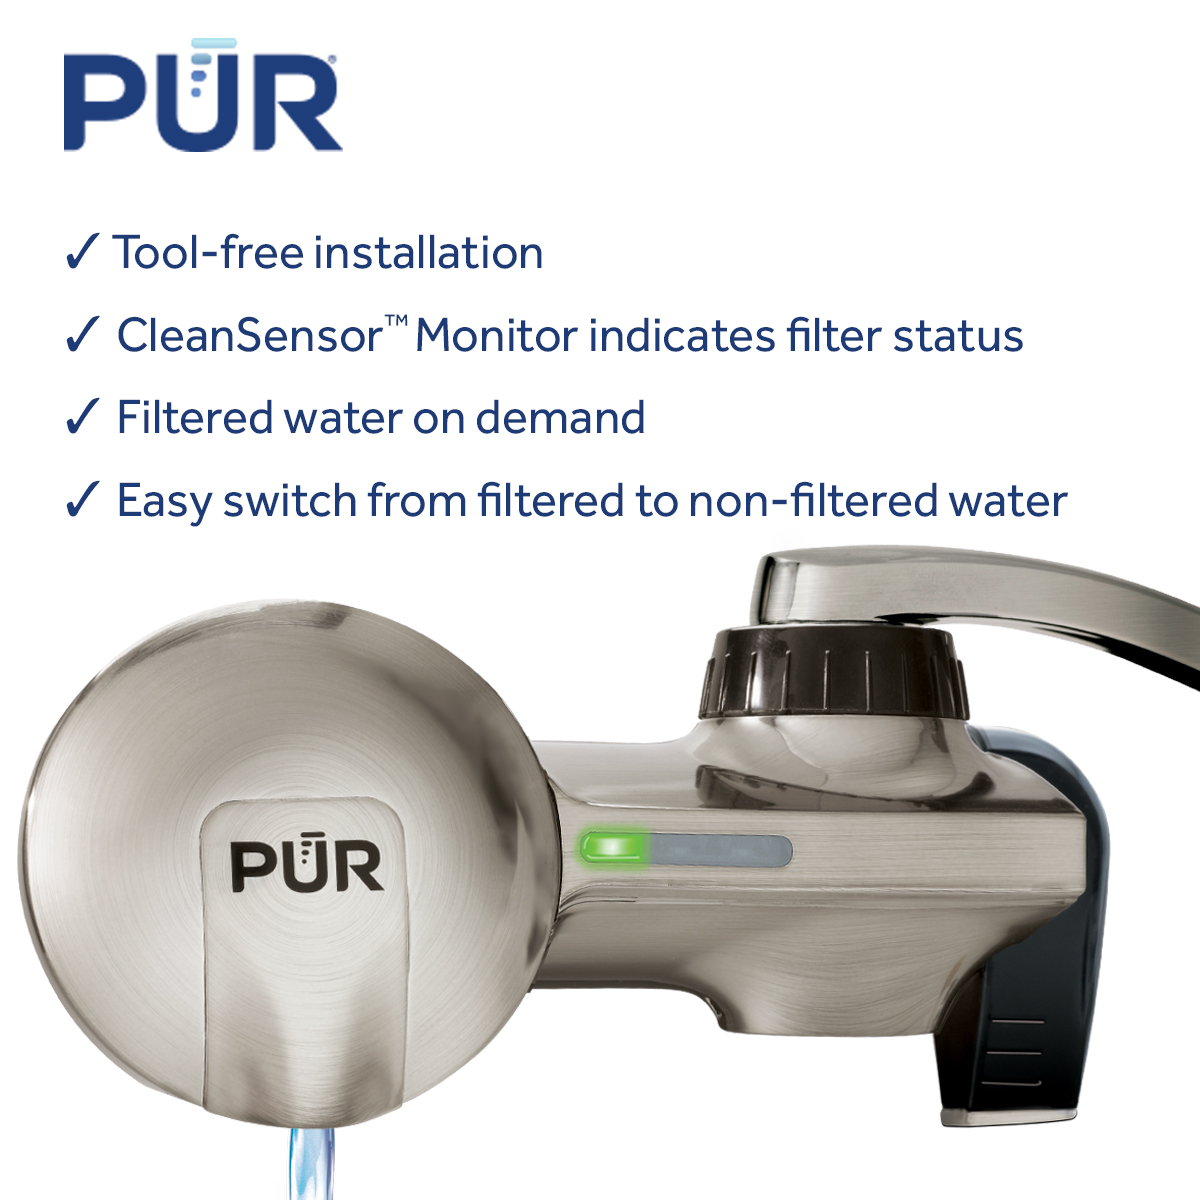 PUR PLUS Faucet Mount Water Filtration System, Stainless Steel Style, PFM450S - image 4 of 11